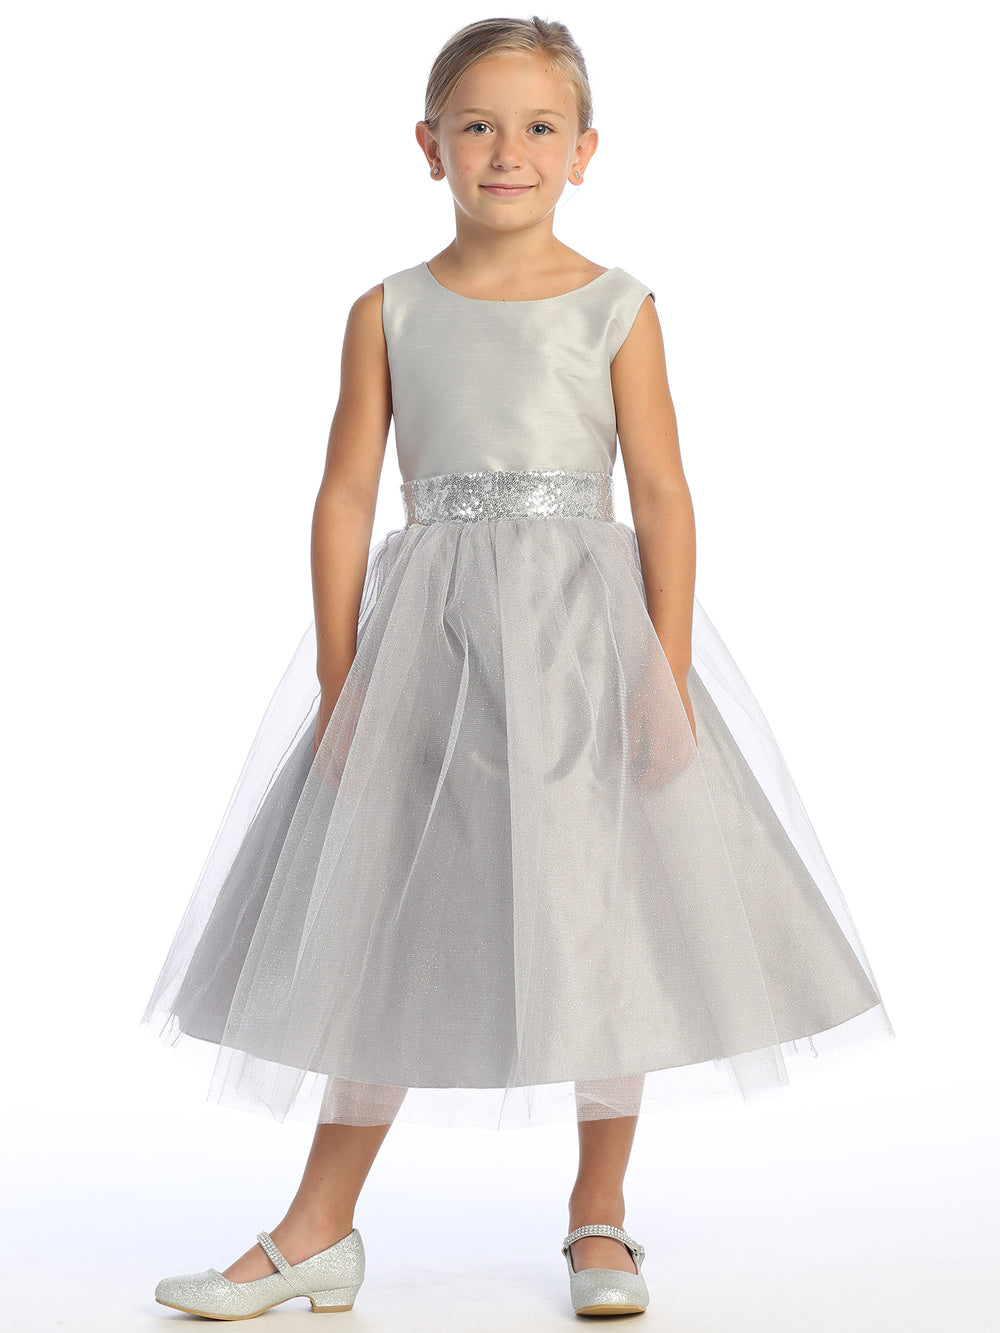 Flower girl gleams in a silver shantung dress, sequins twinkling in the tulle.